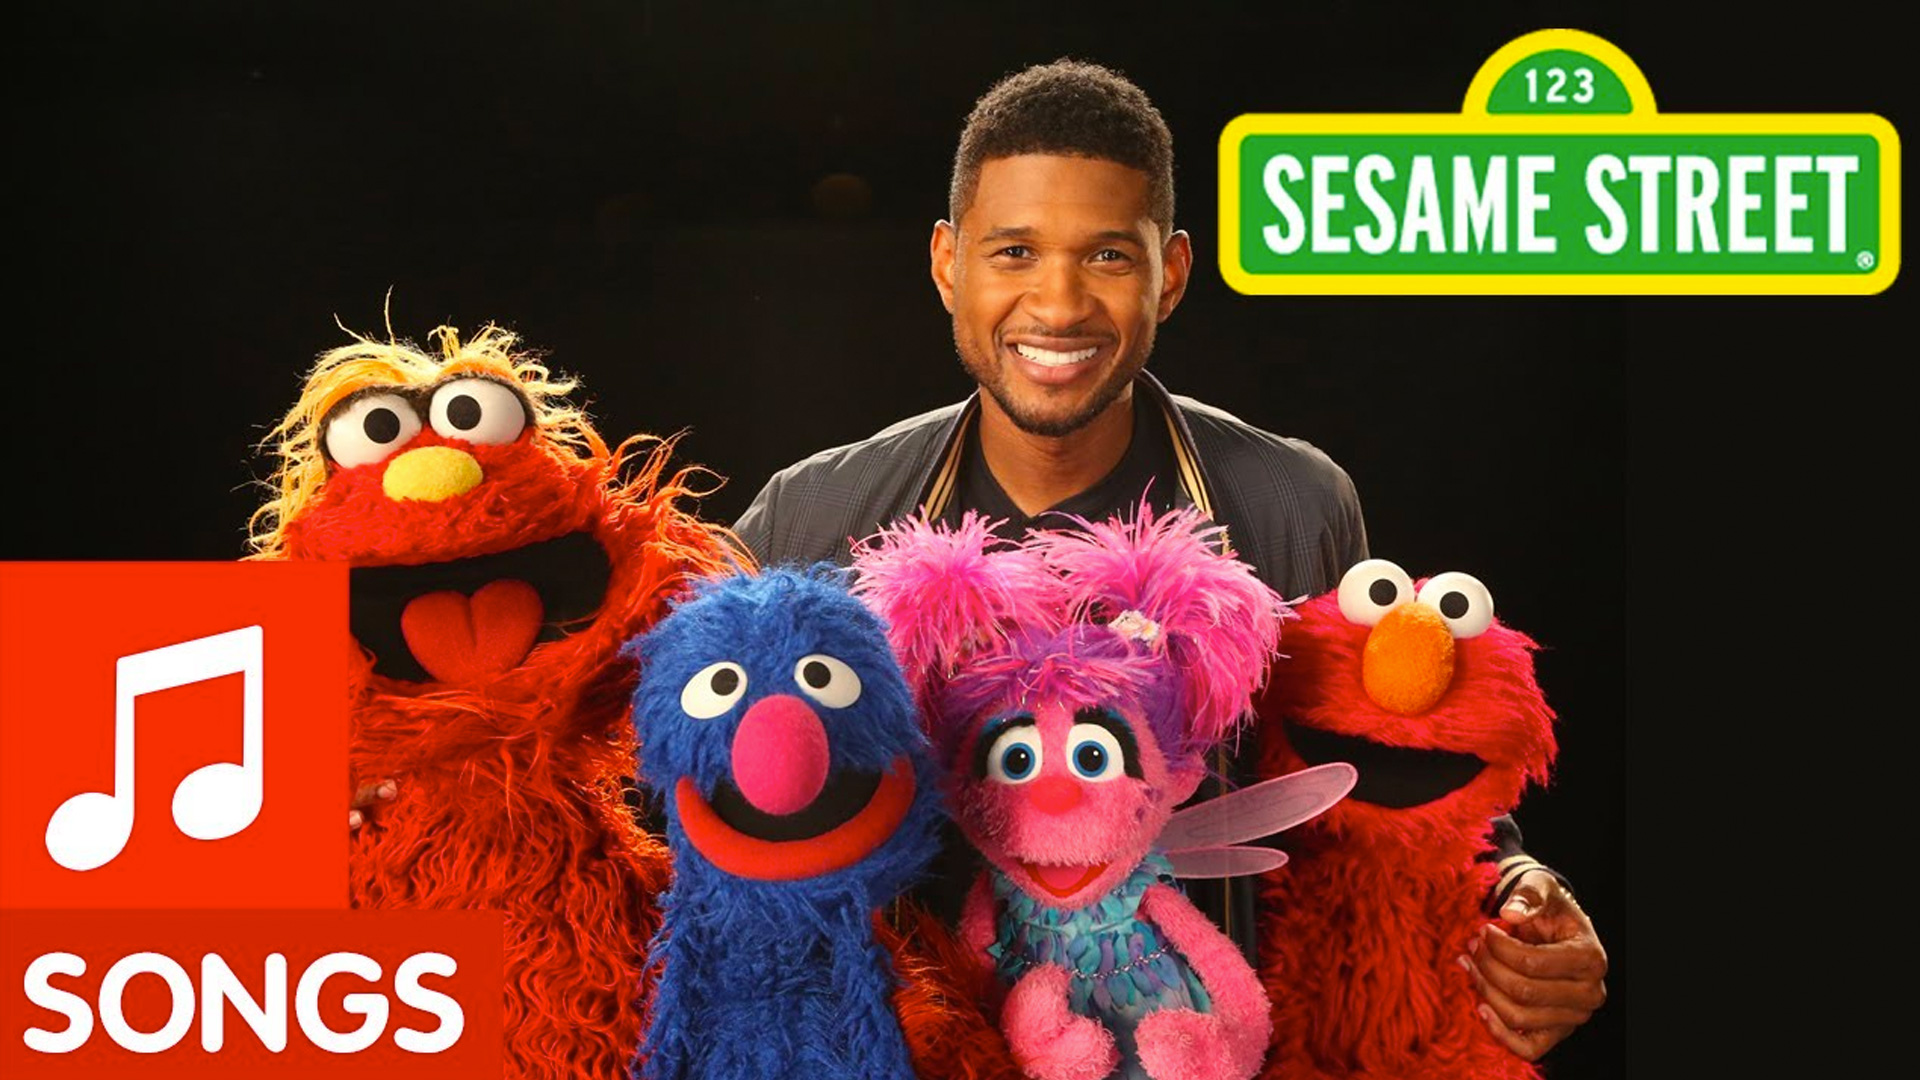 Usher’s ABC Song